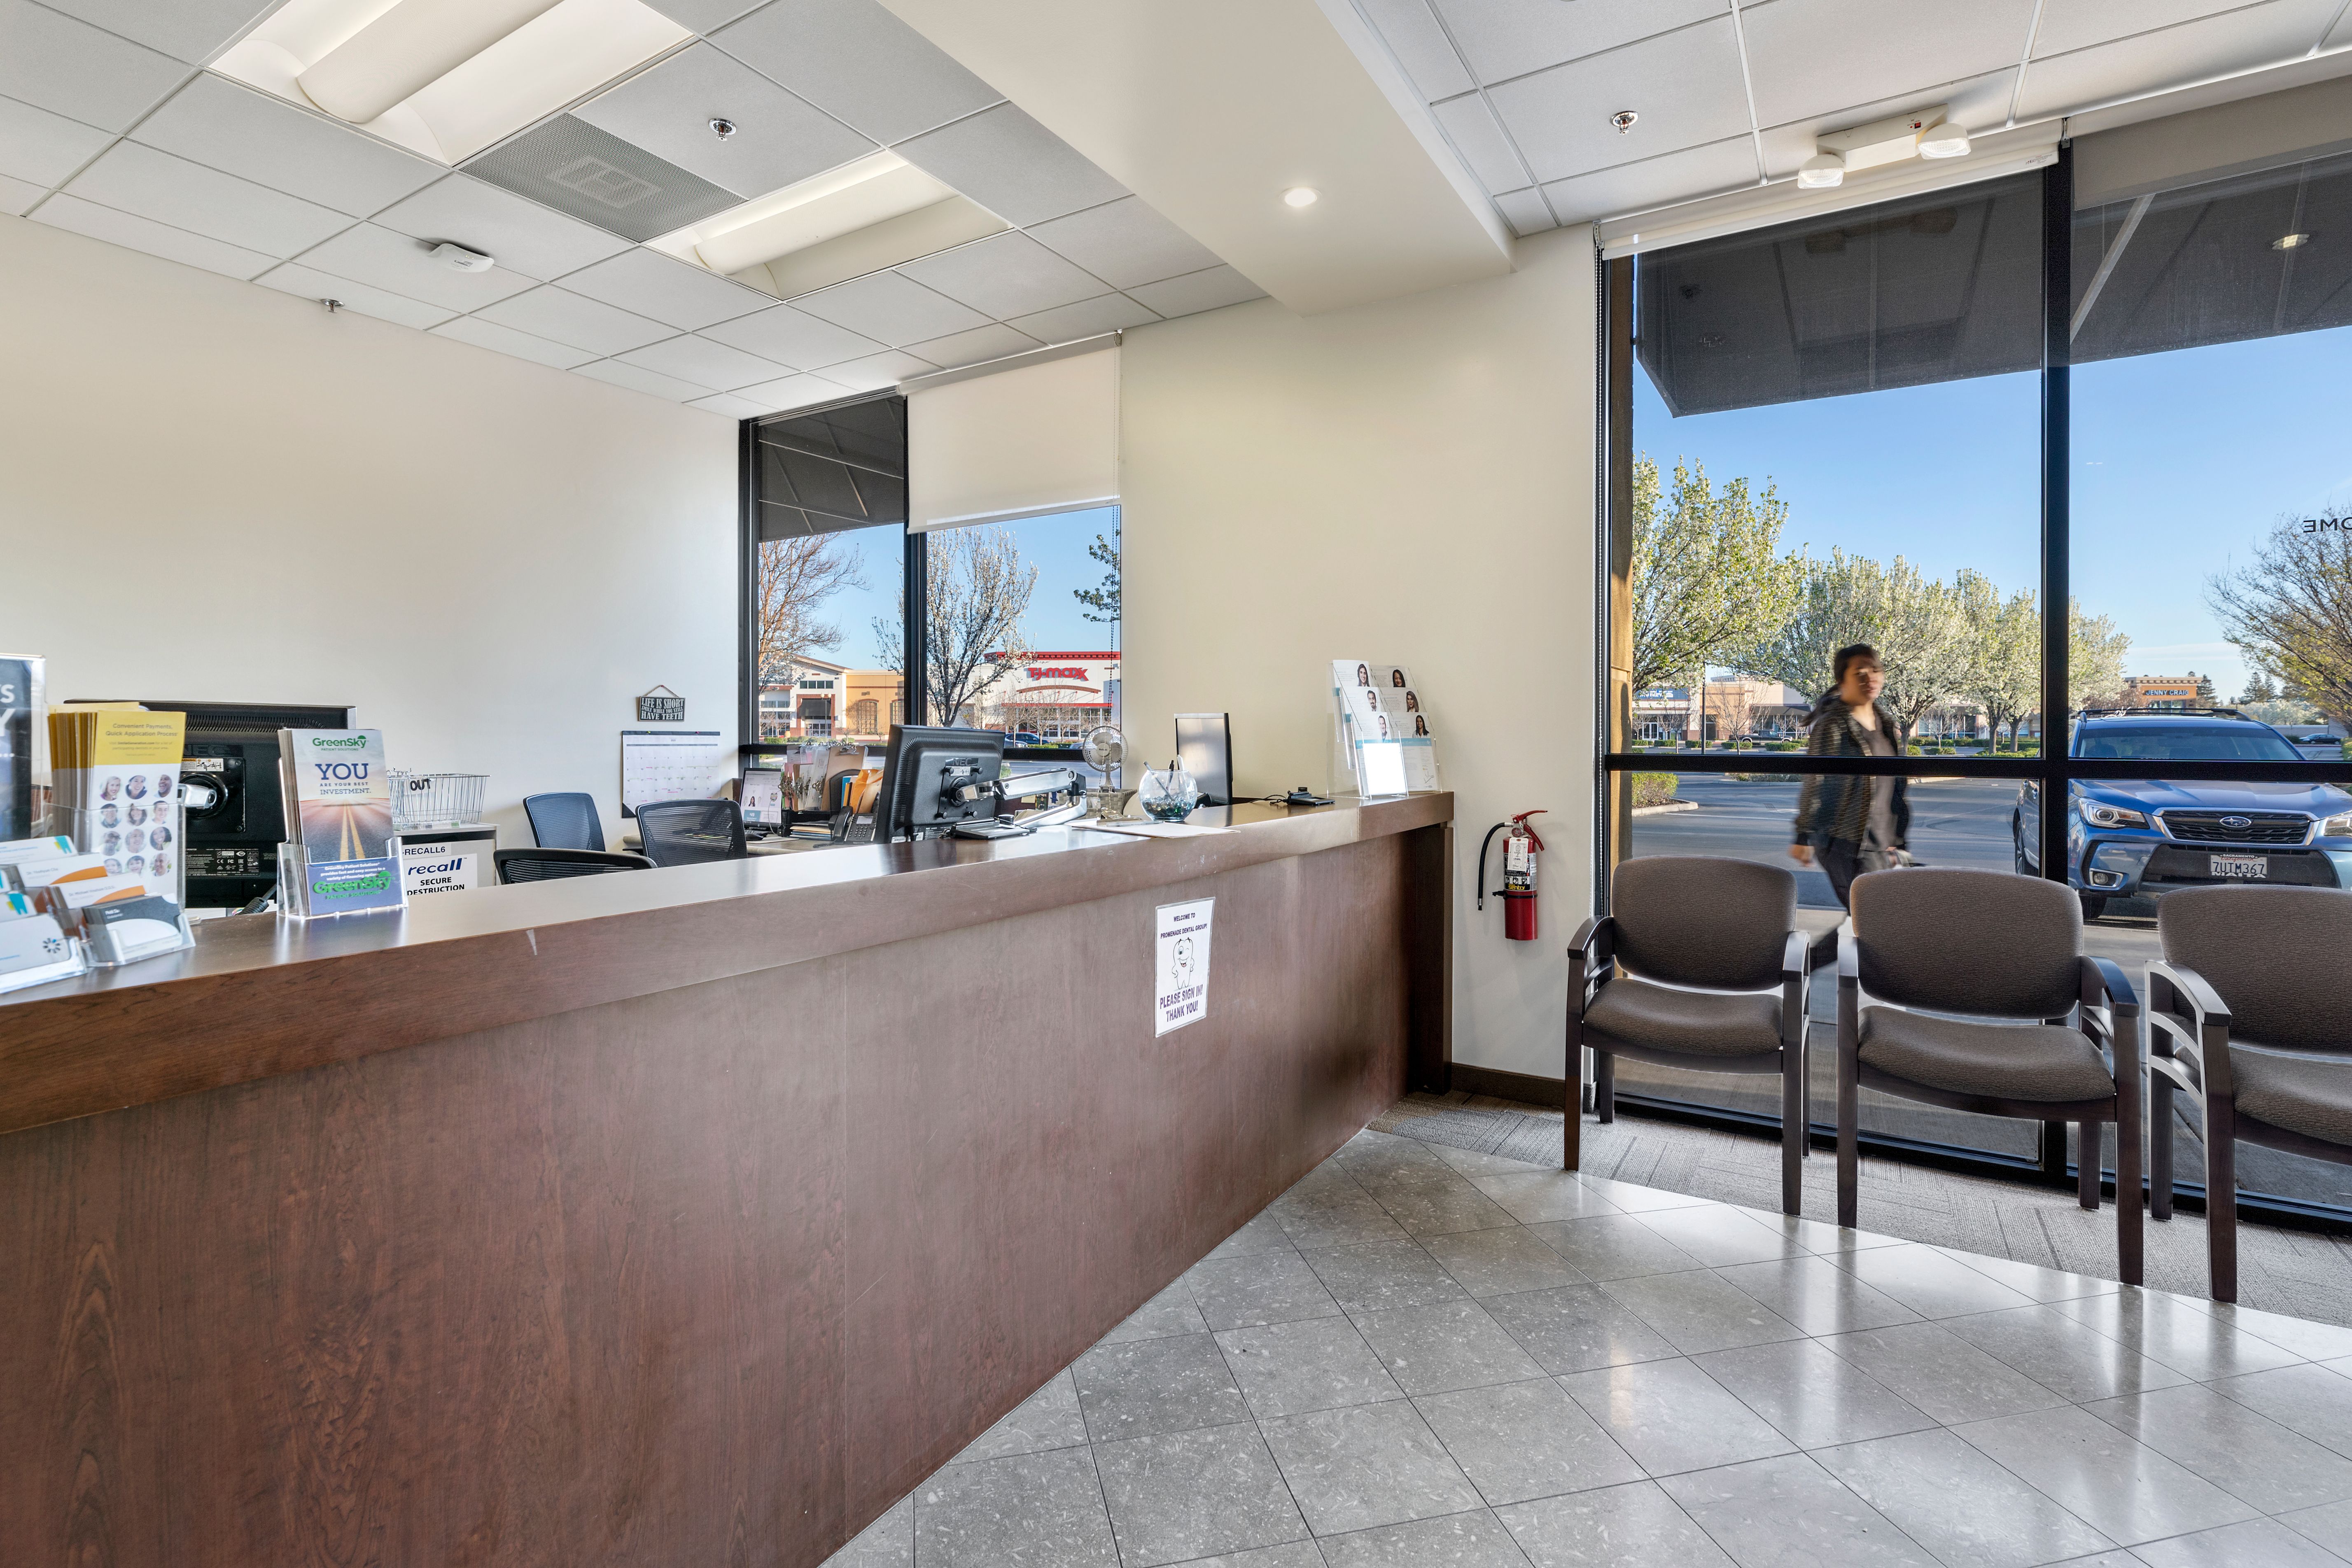 Promenade Dental Group opened its doors to the Sacramento community in May 2008!